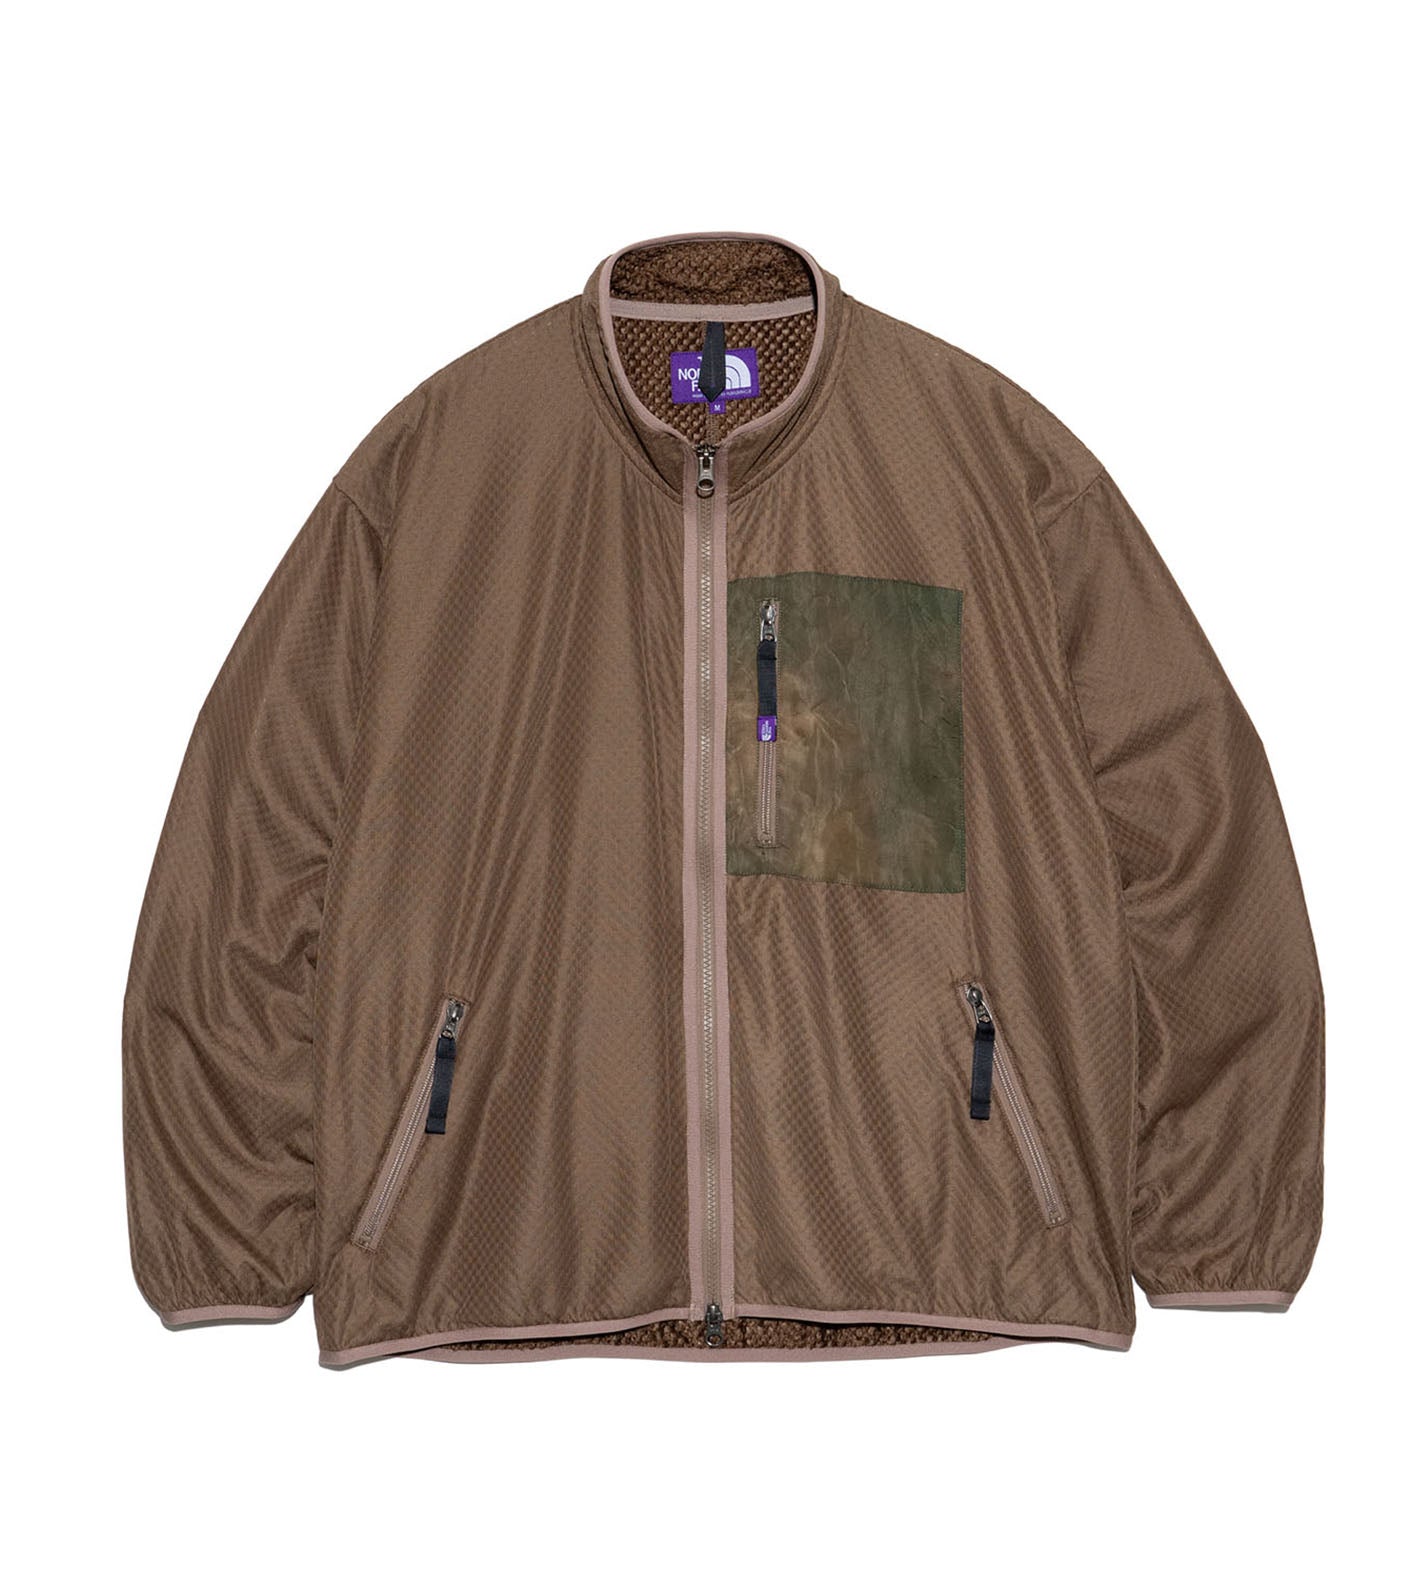 THE NORTH FACE PURPLE LABEL Field Zip Up Jacket